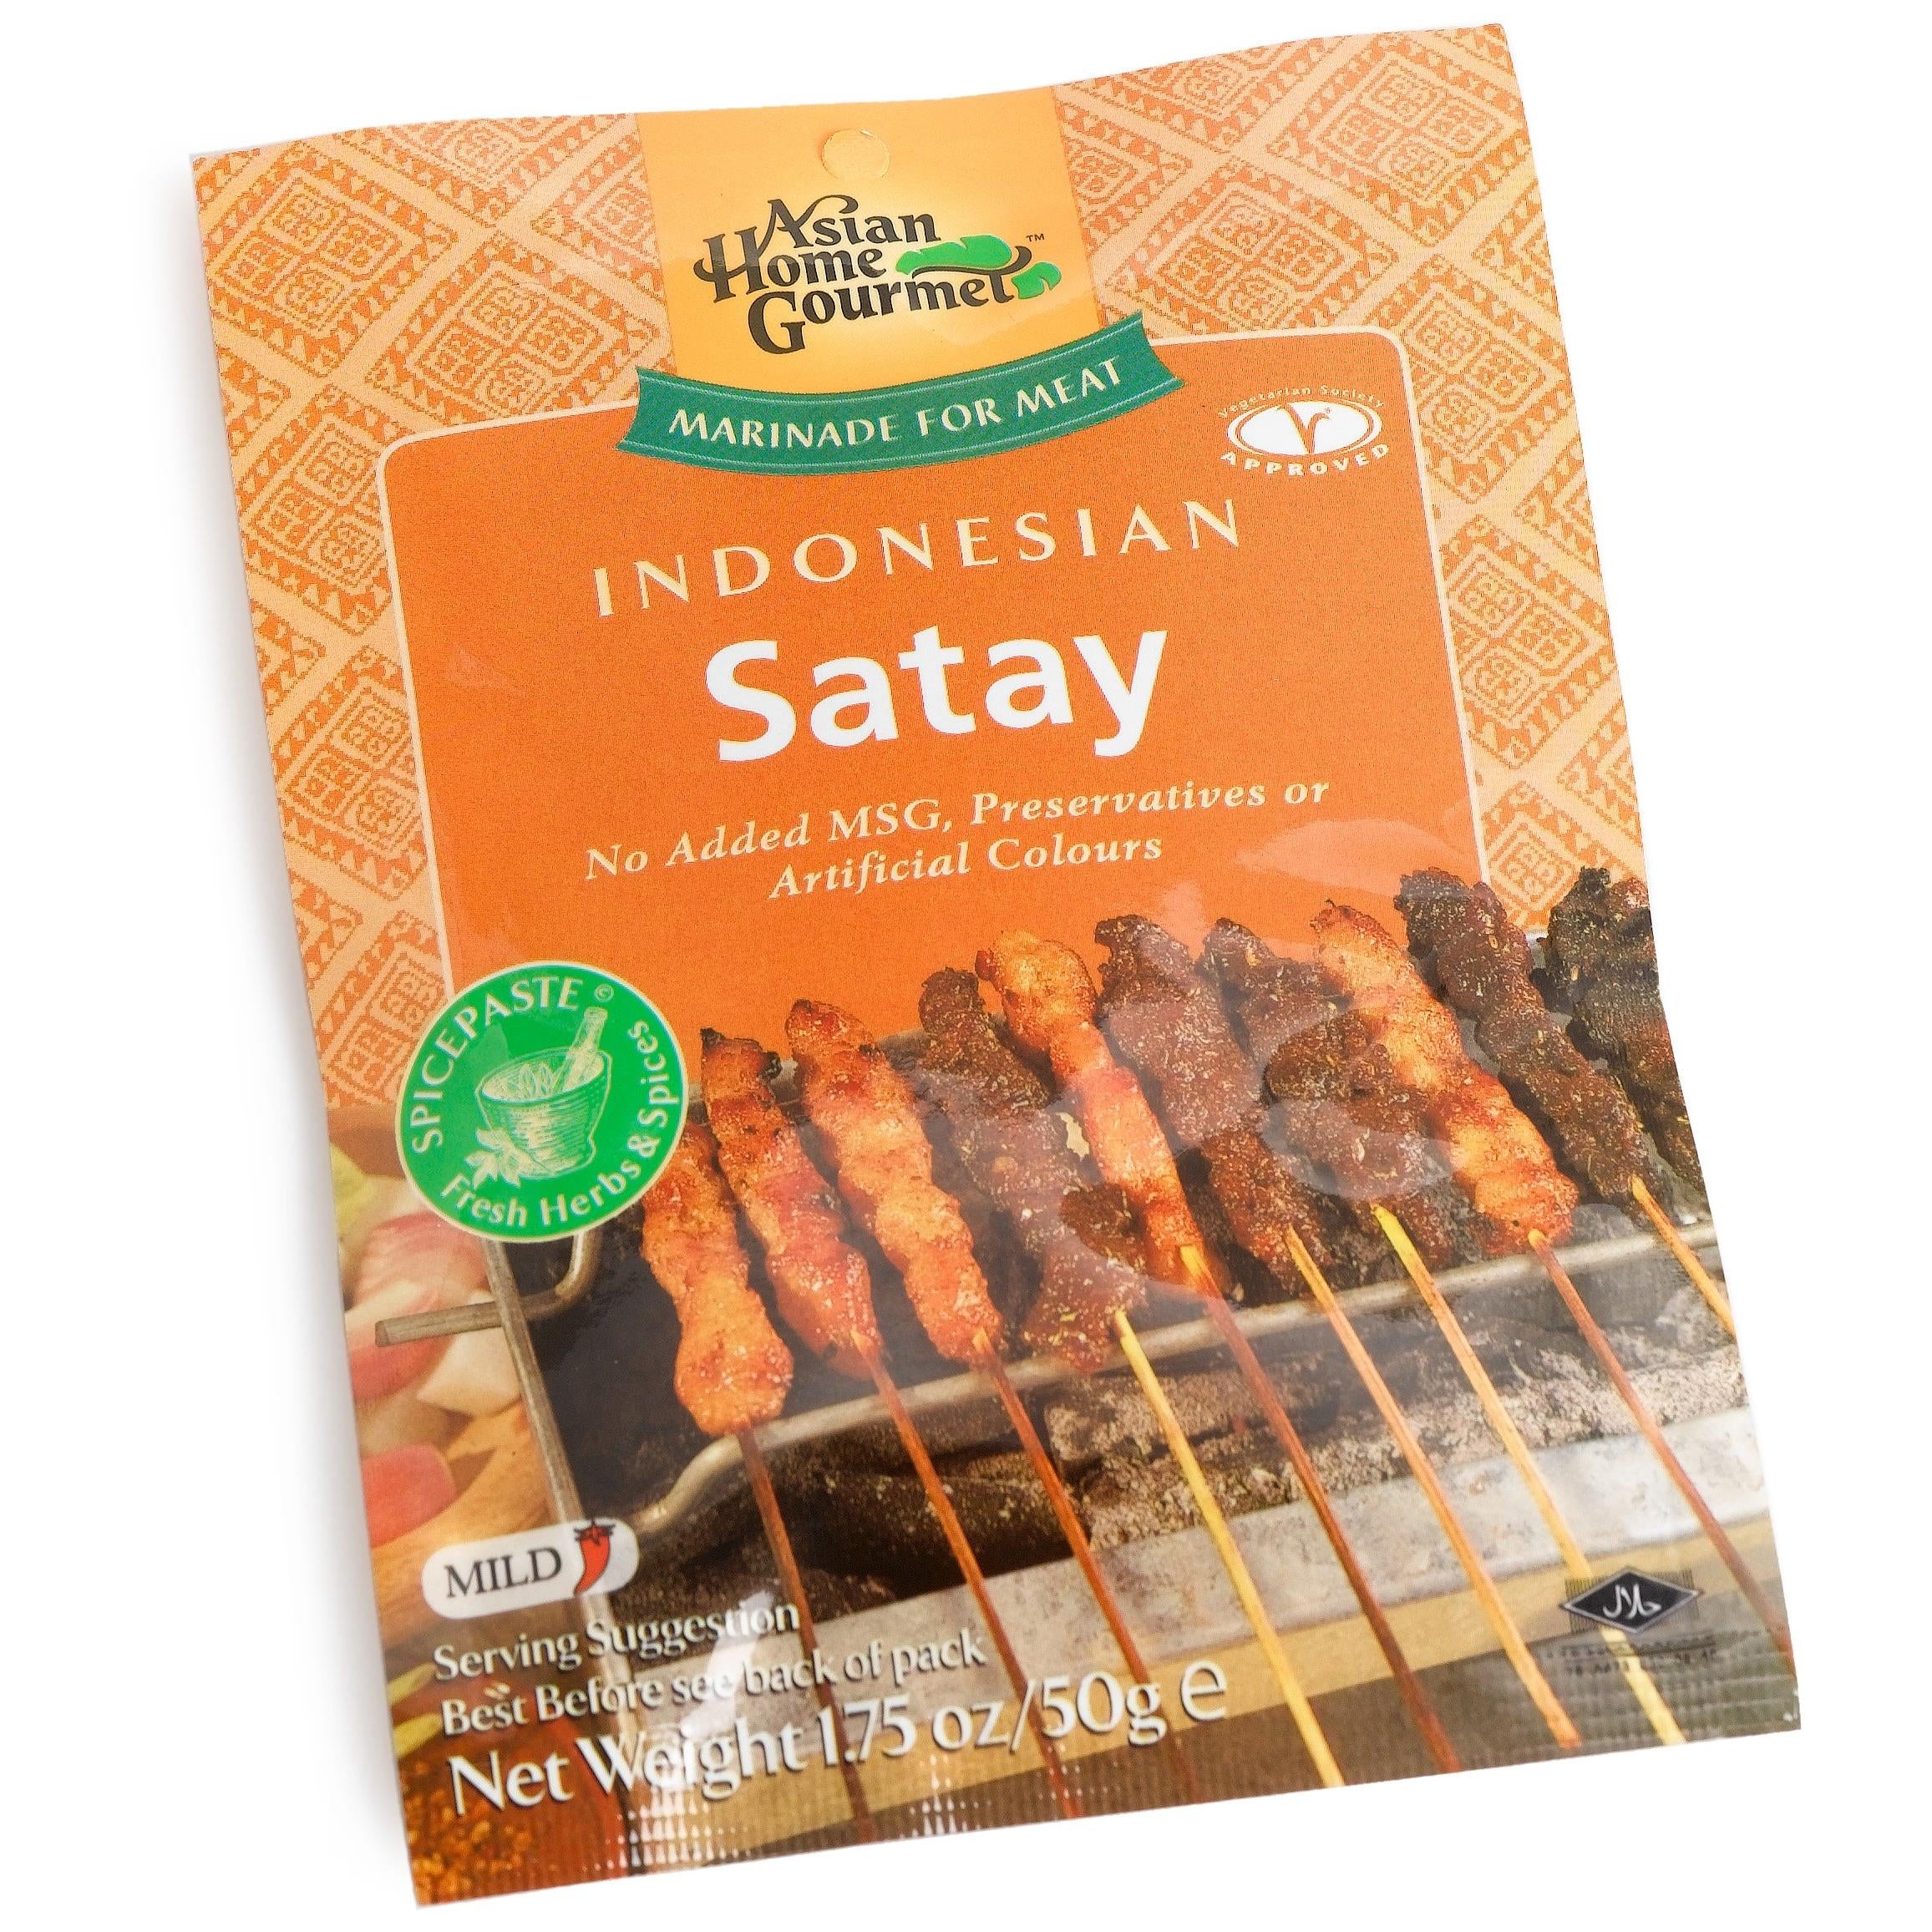 Asian Home Gourmet Indonesian Satay Seasoning, 1.75-Ounce Boxes (Pack of 12)